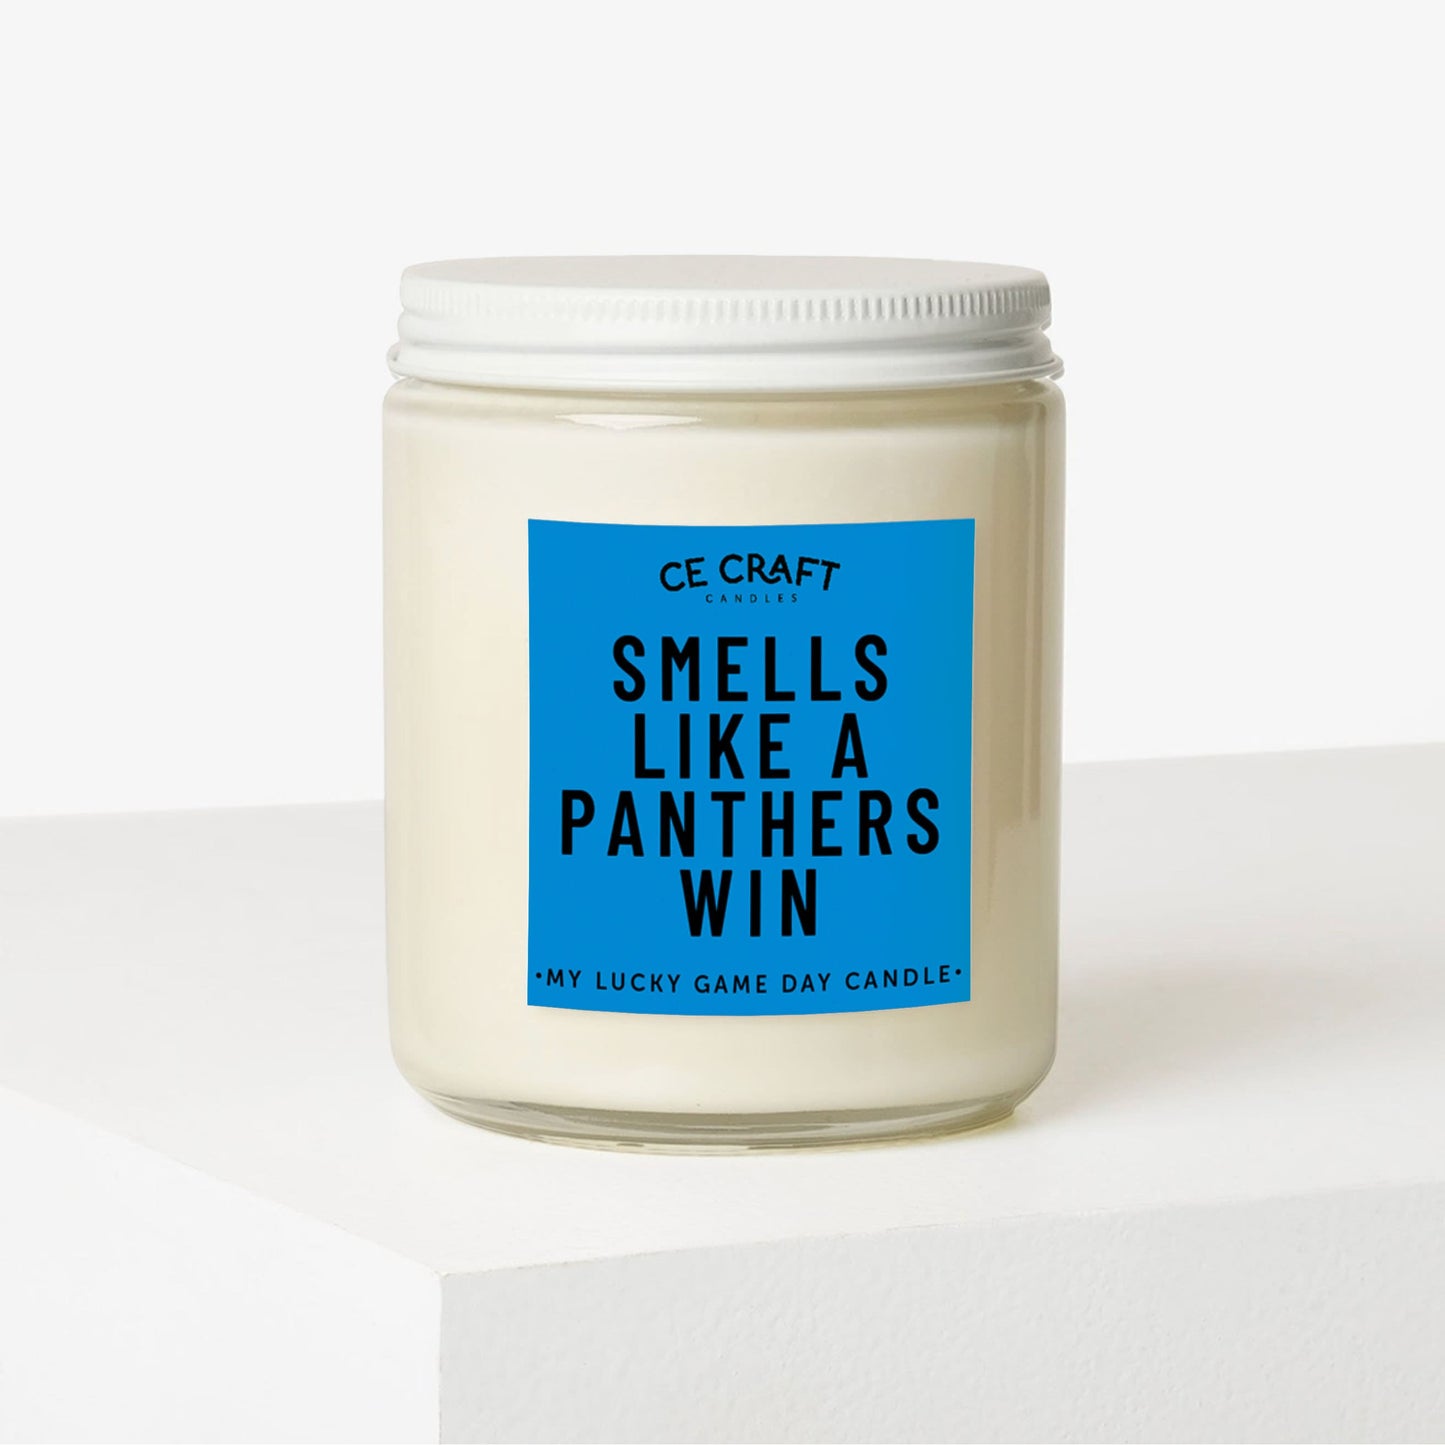 Smells Like a Panthers Win Scented Candle C & E Craft Co 